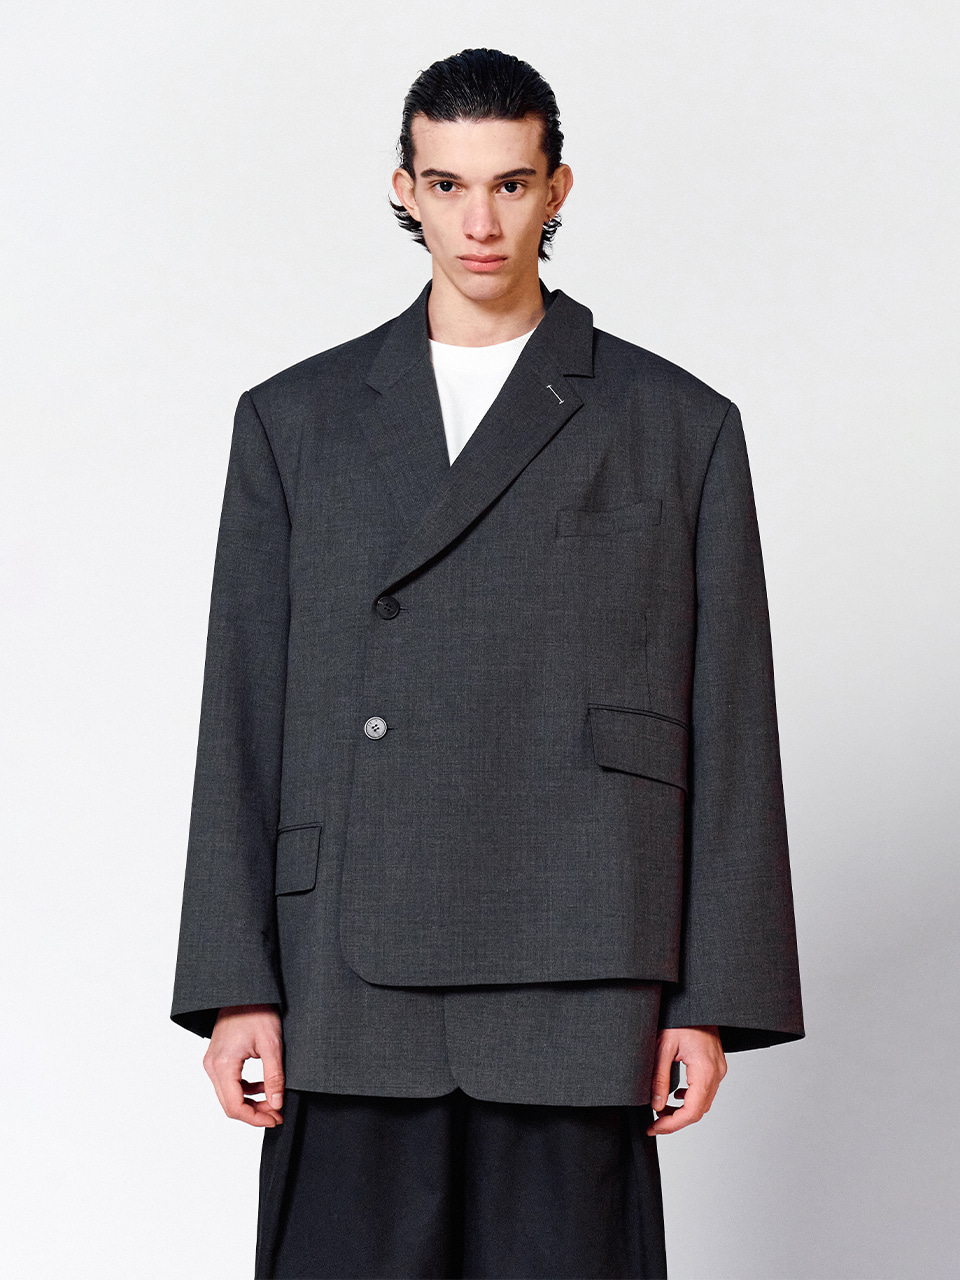 IEY - DOUBLE COVER BLAZER Charcoal